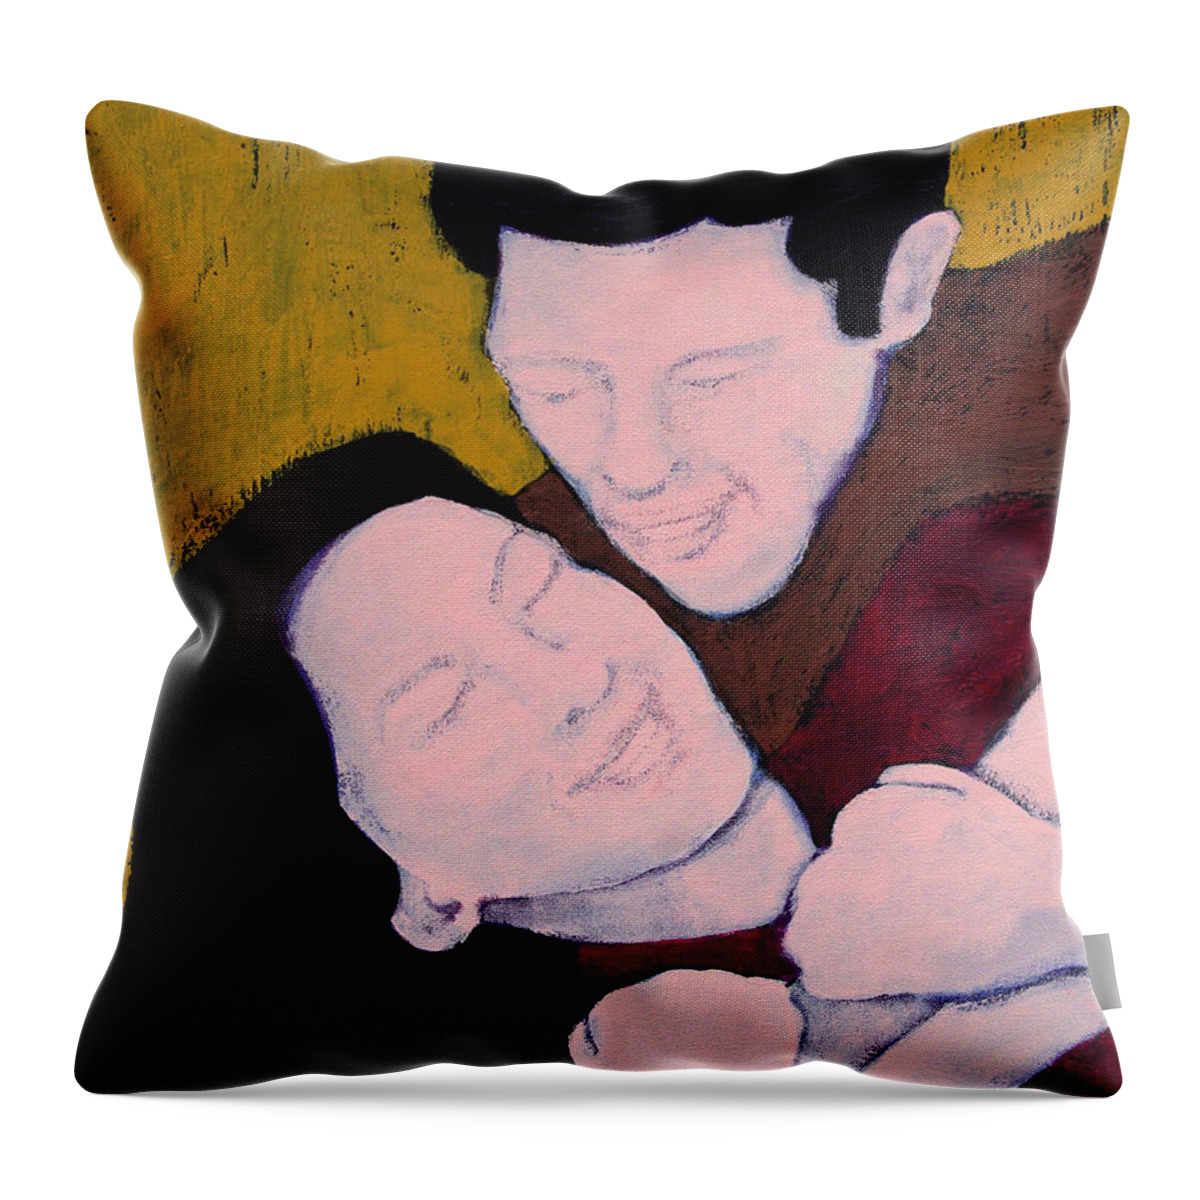 Love Throw Pillow featuring the painting Just Hold Me Tight by Carrie MaKenna